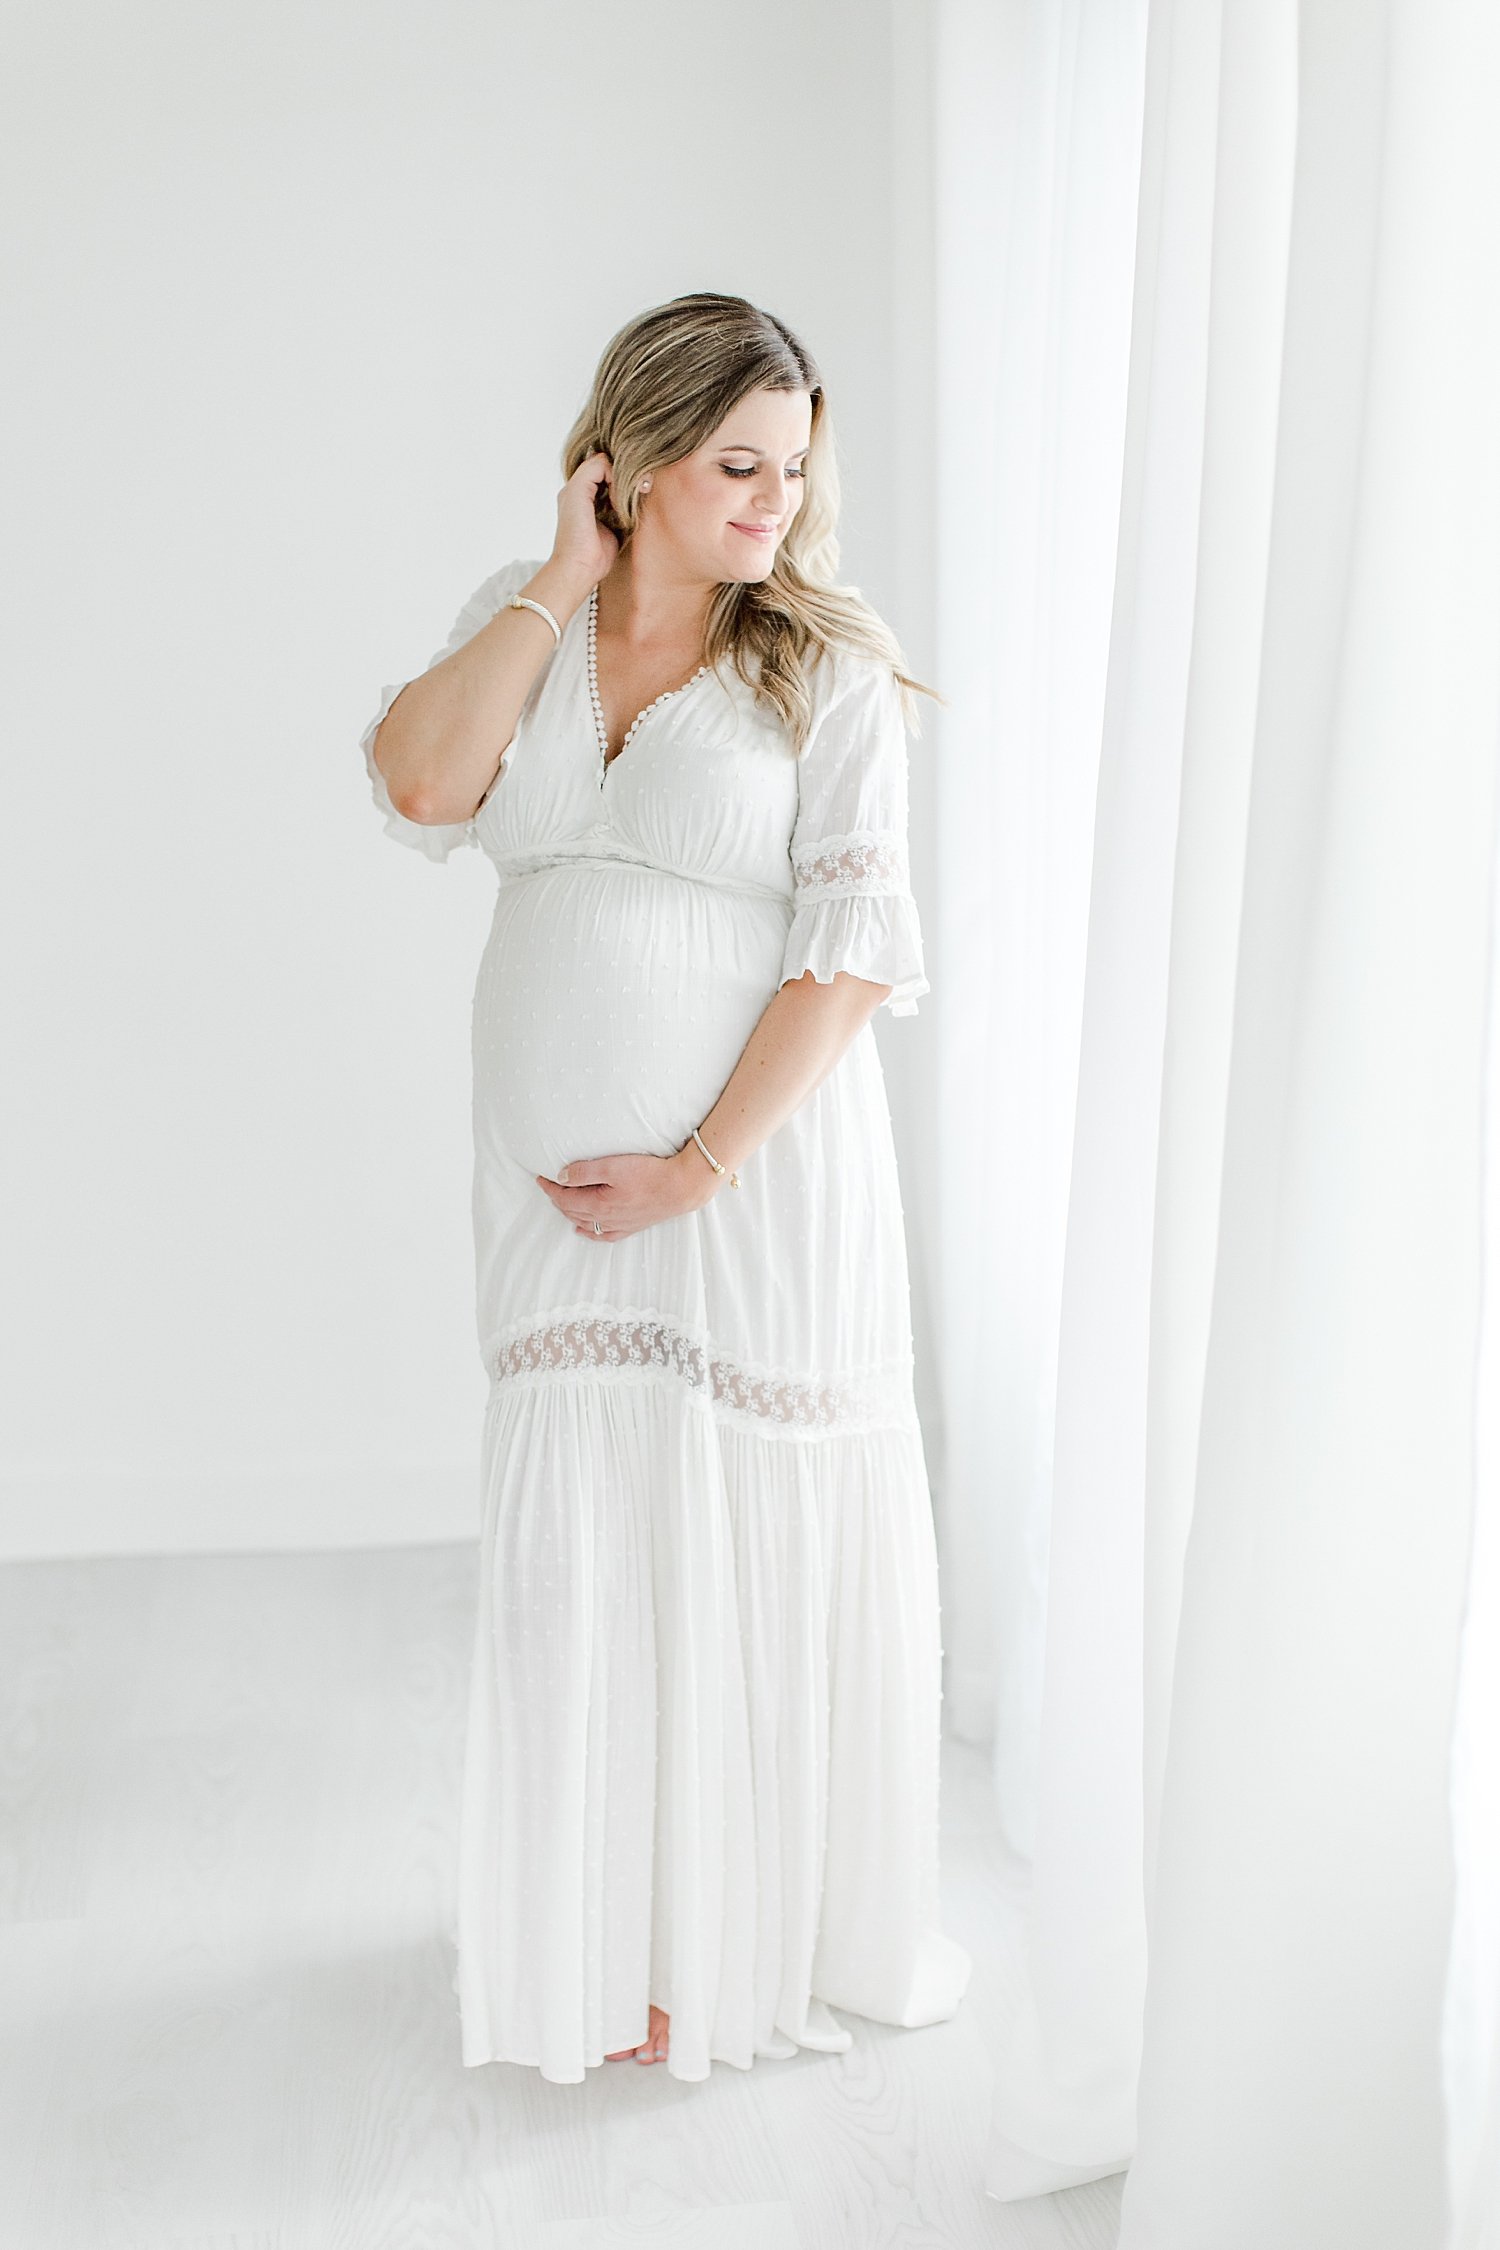 Pregnant mom wearing a white dress for studio maternity session | Kristin Wood Photography